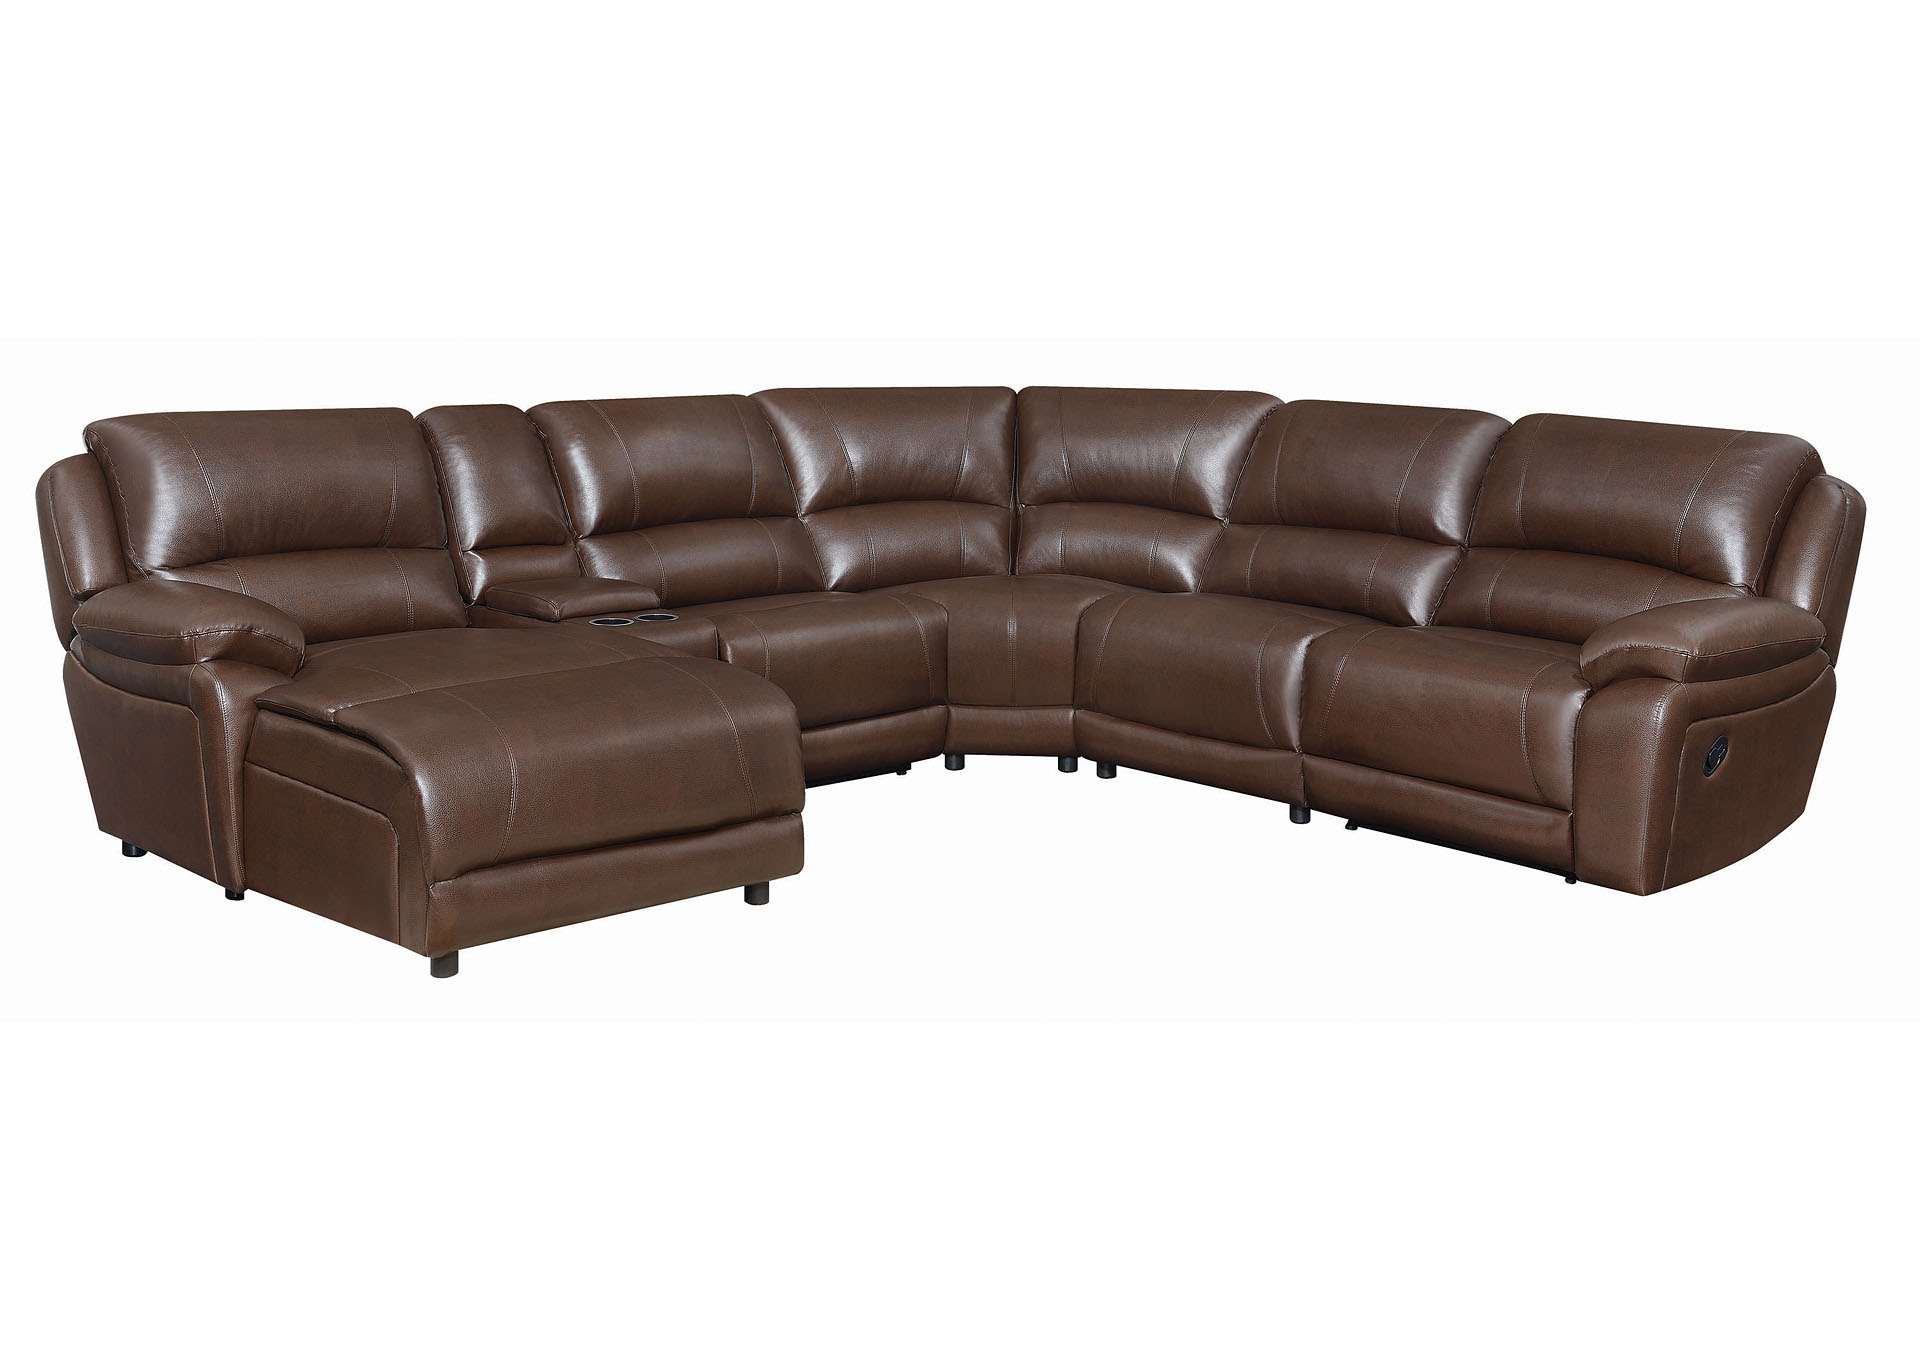 Rock Mackenzie Casual Motion Sectional,Coaster Furniture